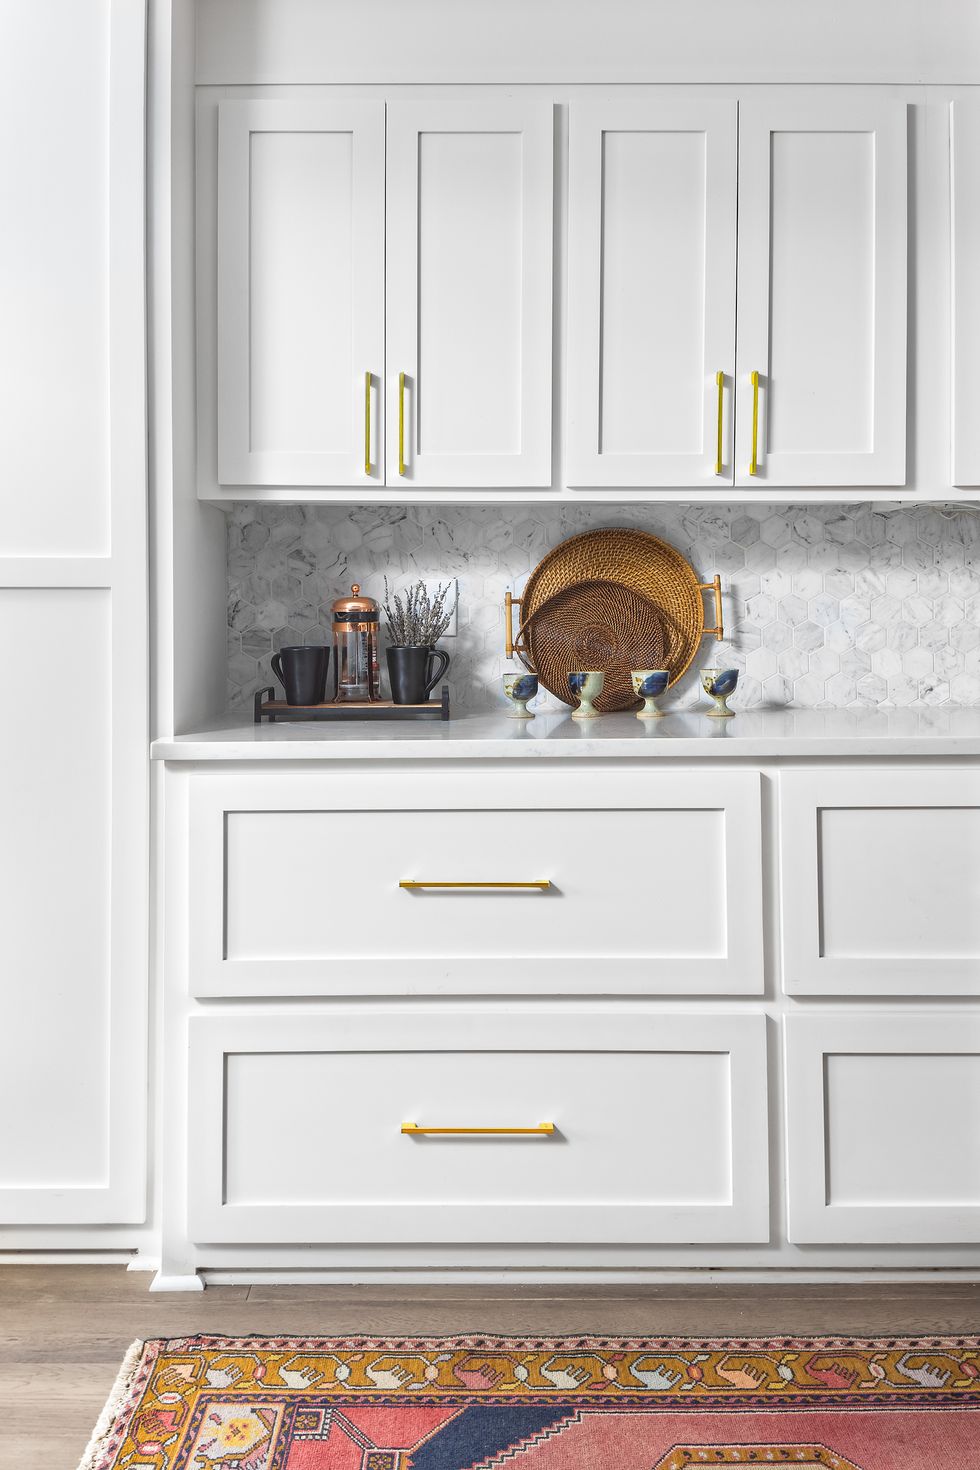 white kitchen with drawers